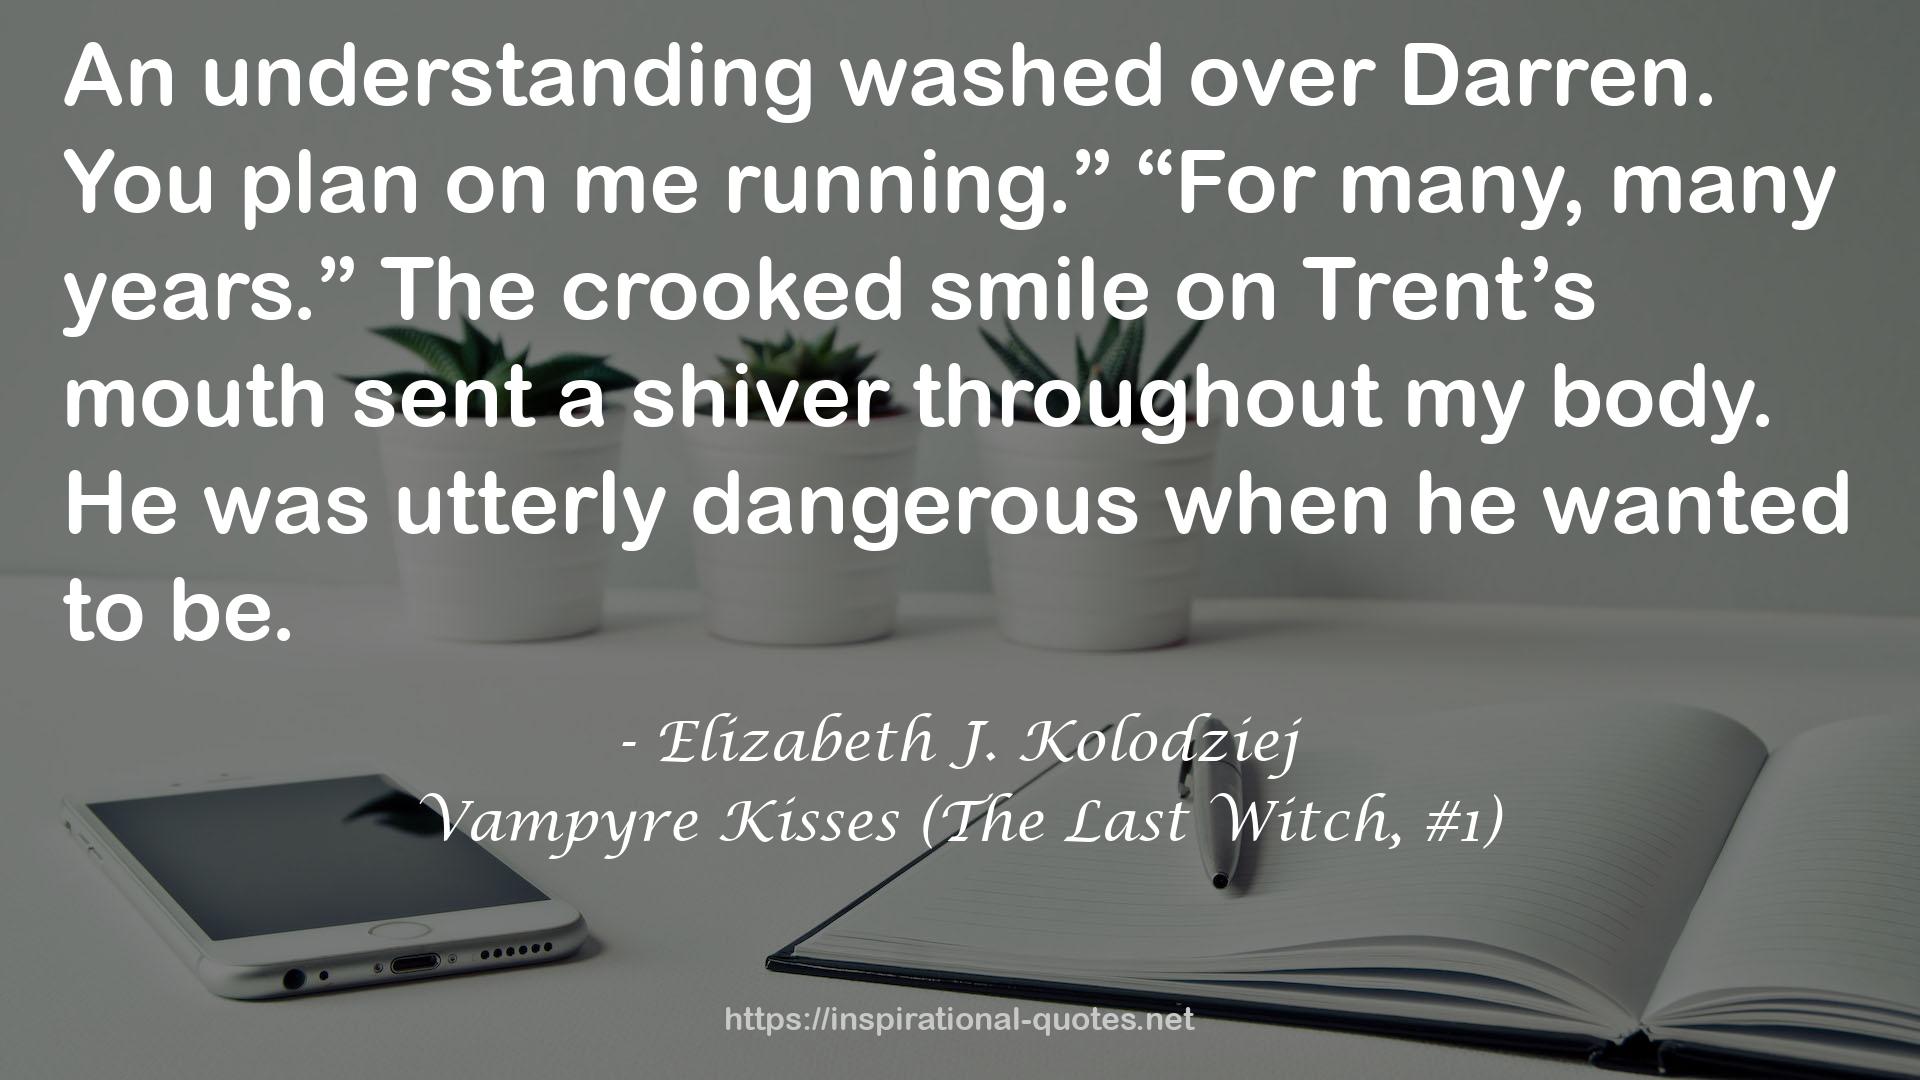 Vampyre Kisses (The Last Witch, #1) QUOTES